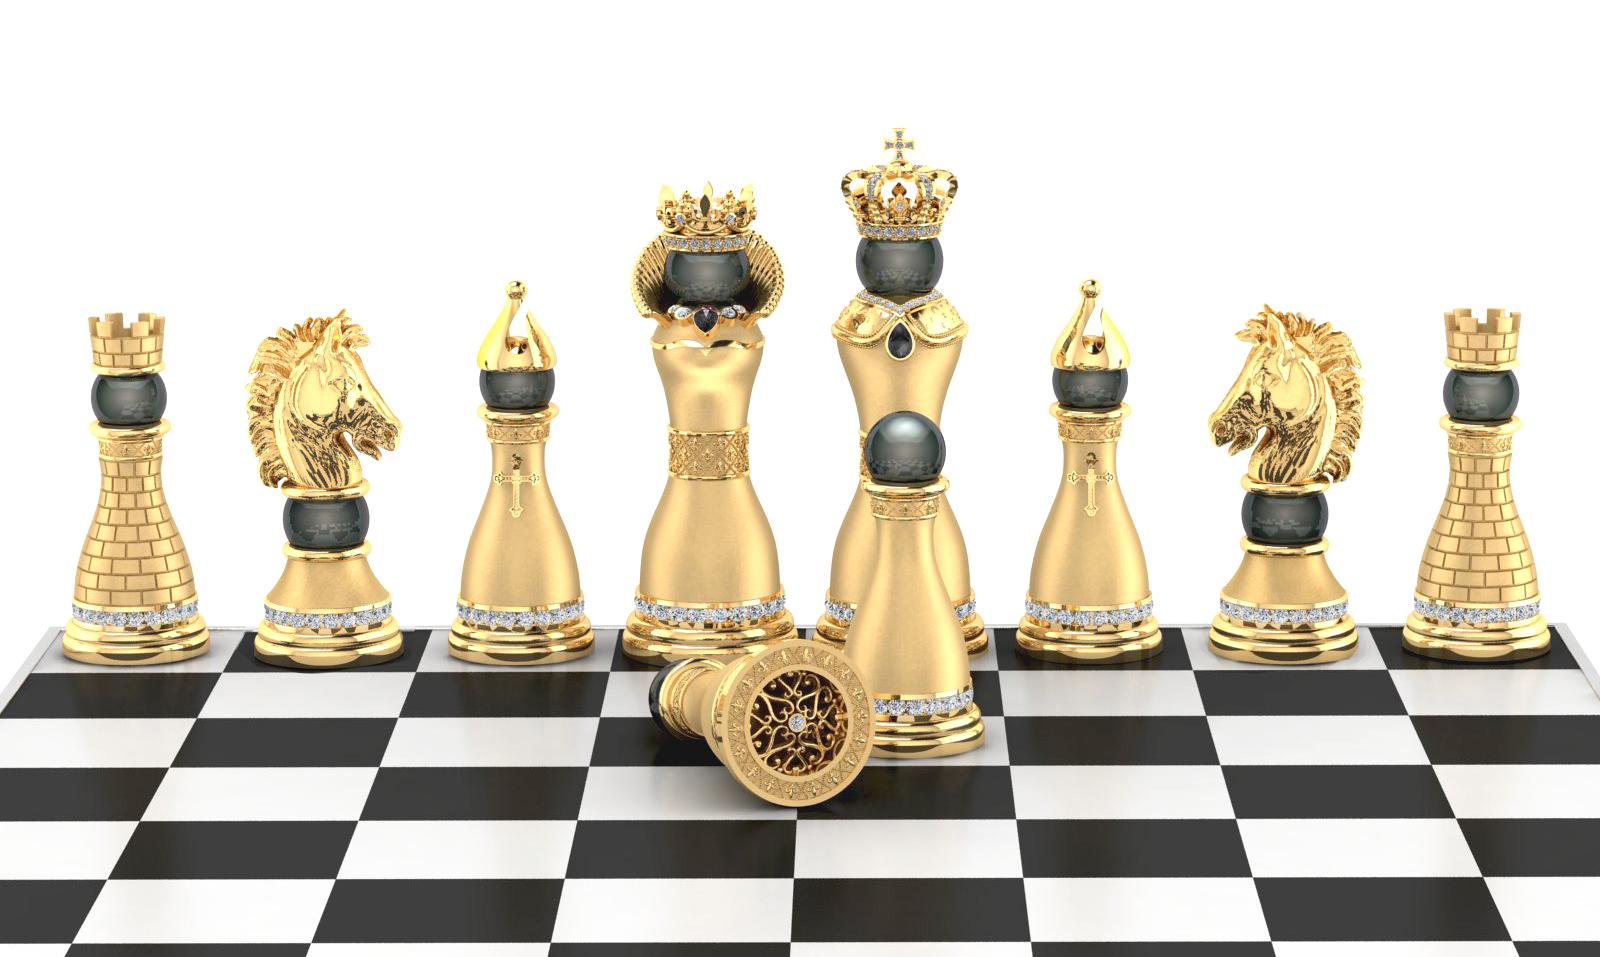 The Gold Royale chess set is handcrafted in solid 18K yellow gold and set with over 35 carats of the world's finest diamonds. This unique chess set radiates pure opulence through the finest quality materials design and workmanship. Crafted by renown